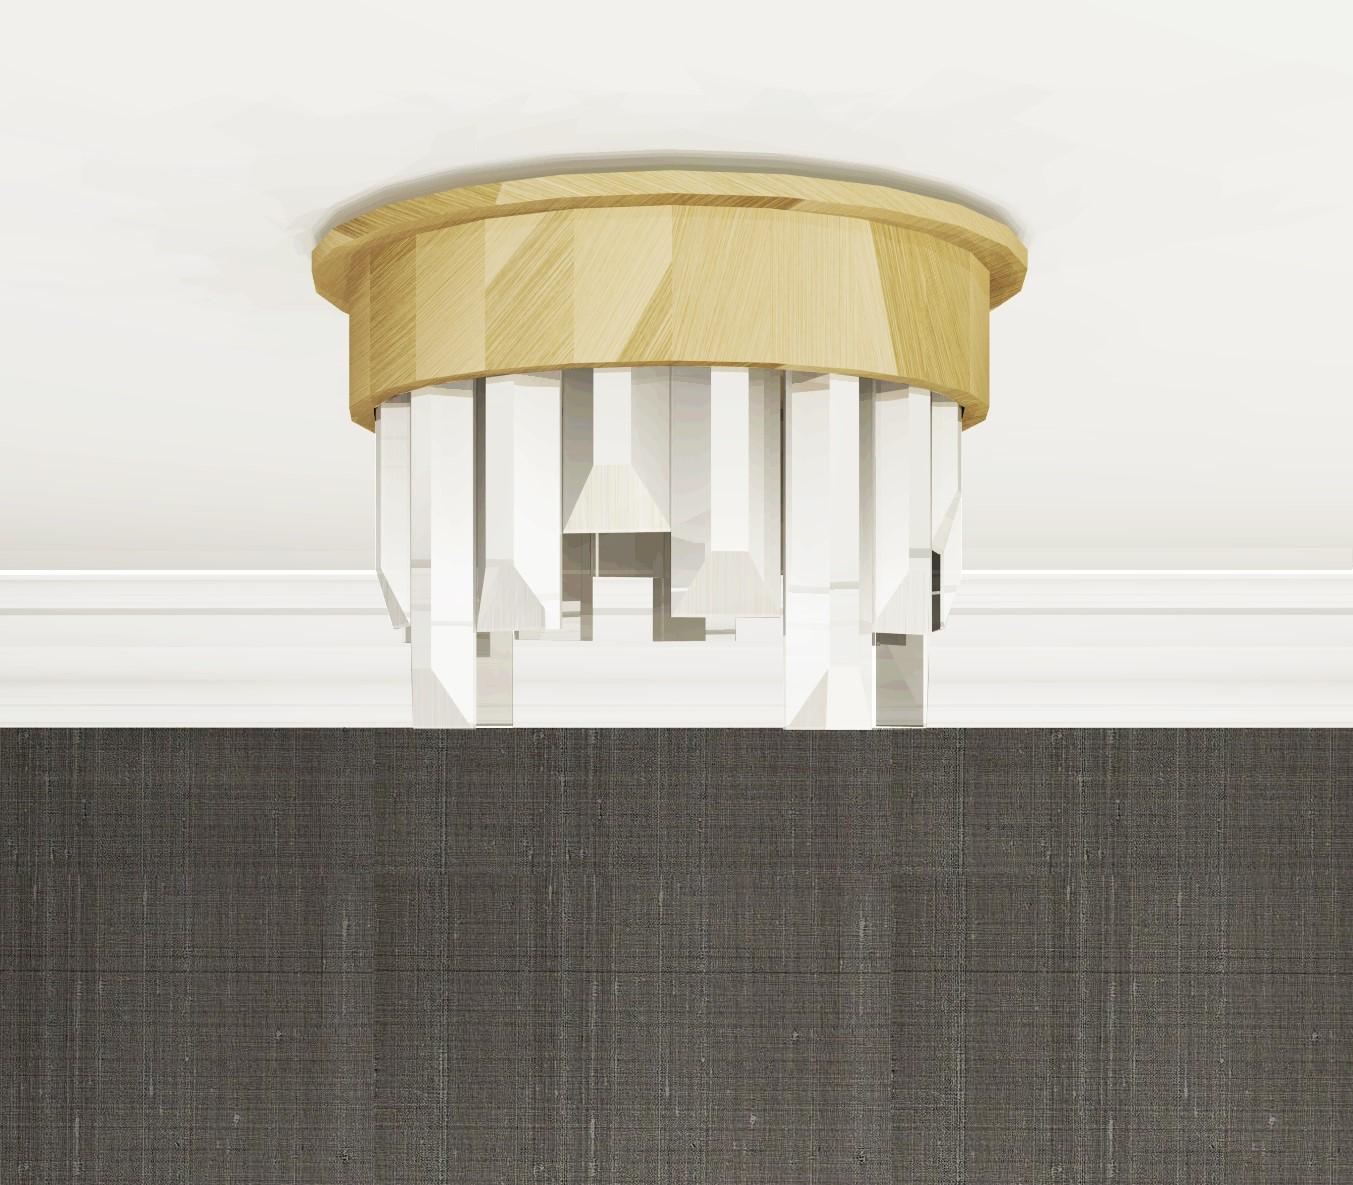 This flush mount uses a mix of bold materials, brushed brass band and over-sized crystal elements, to give impact whilst remaining clean and classic. The designs cool, clean, beveled-edge crystals give a beautiful reflection and transparency, whilst